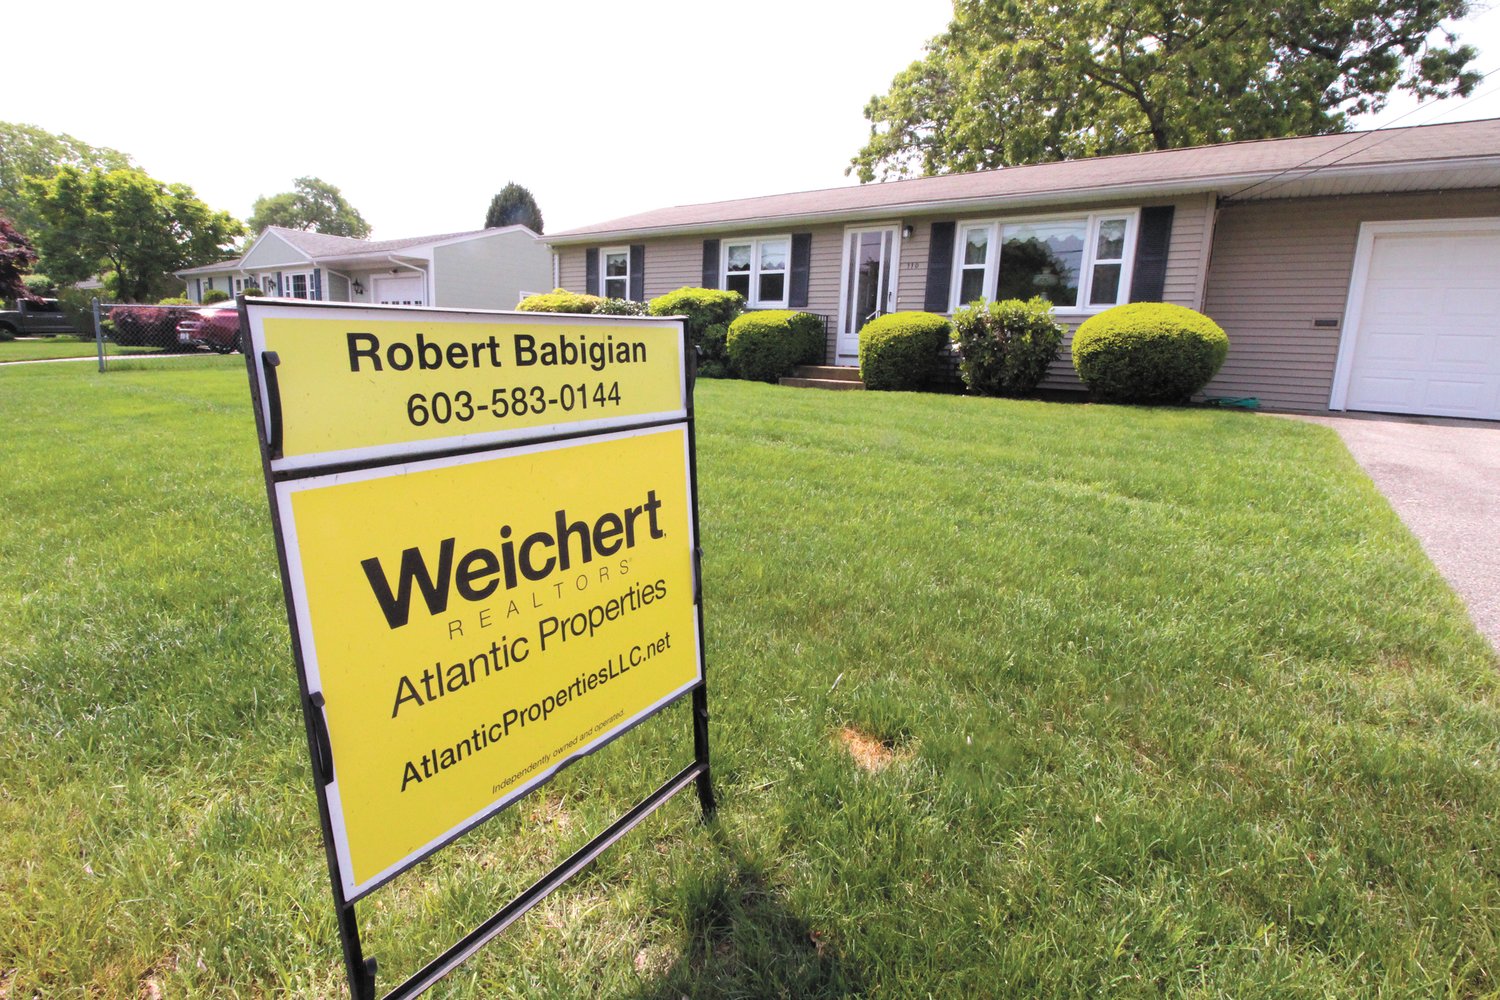 DEMAND IS STILL THERE: Realtor Robert Babigan said there were multiple offers following the open house held over the weekend on this property on Viscount Road. He said offers exceeded the $349,900 asking price. (Warwick Beacon photo)